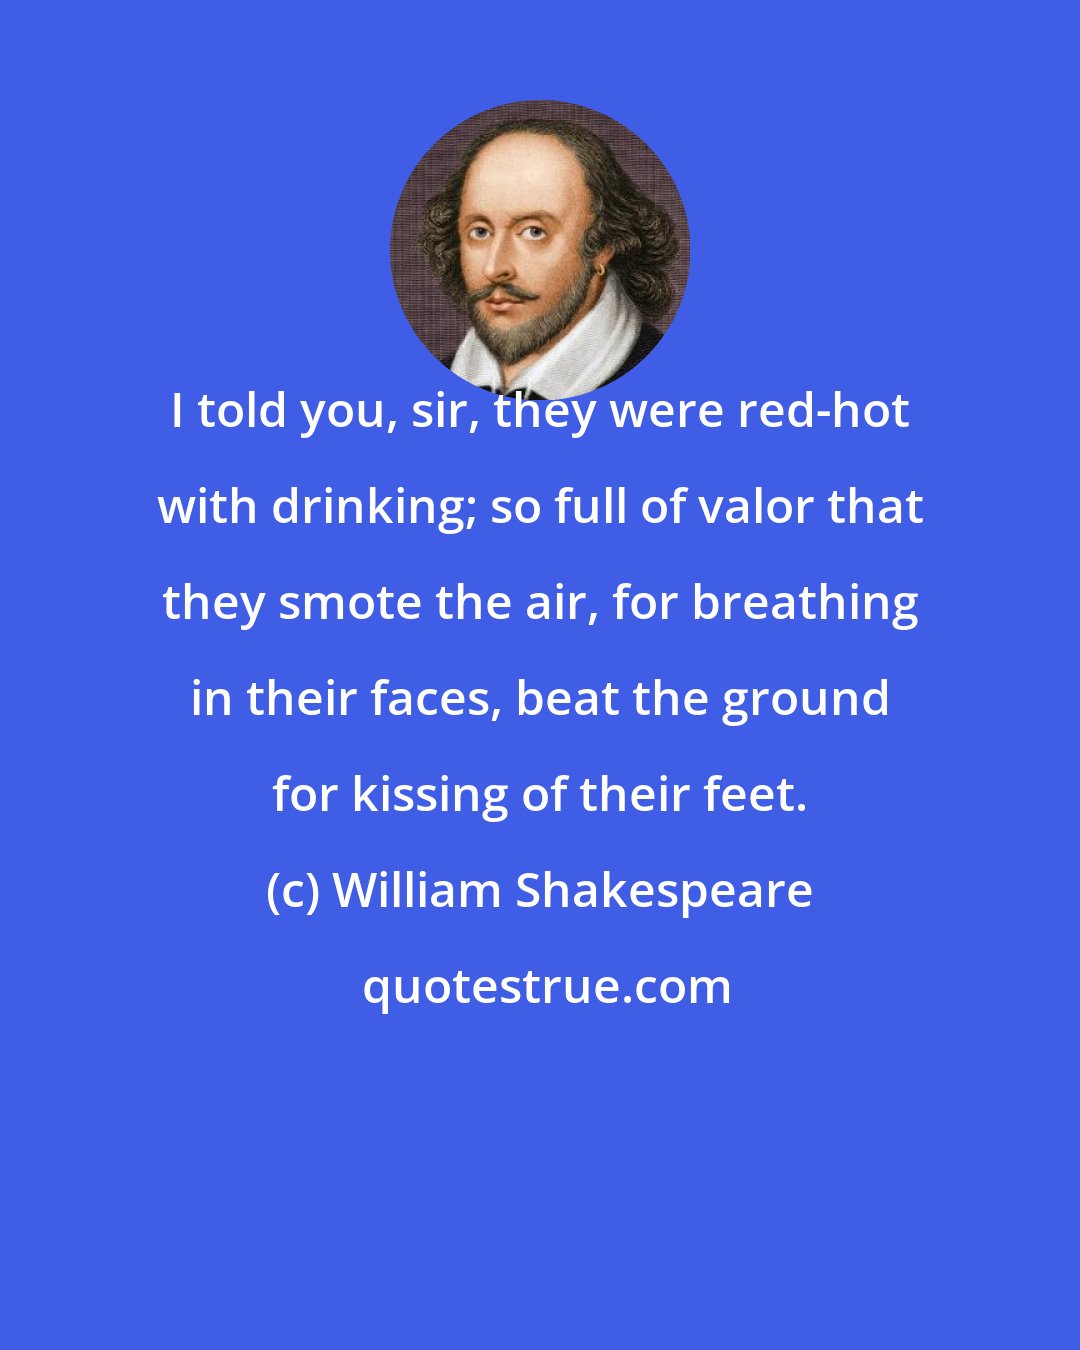 William Shakespeare: I told you, sir, they were red-hot with drinking; so full of valor that they smote the air, for breathing in their faces, beat the ground for kissing of their feet.